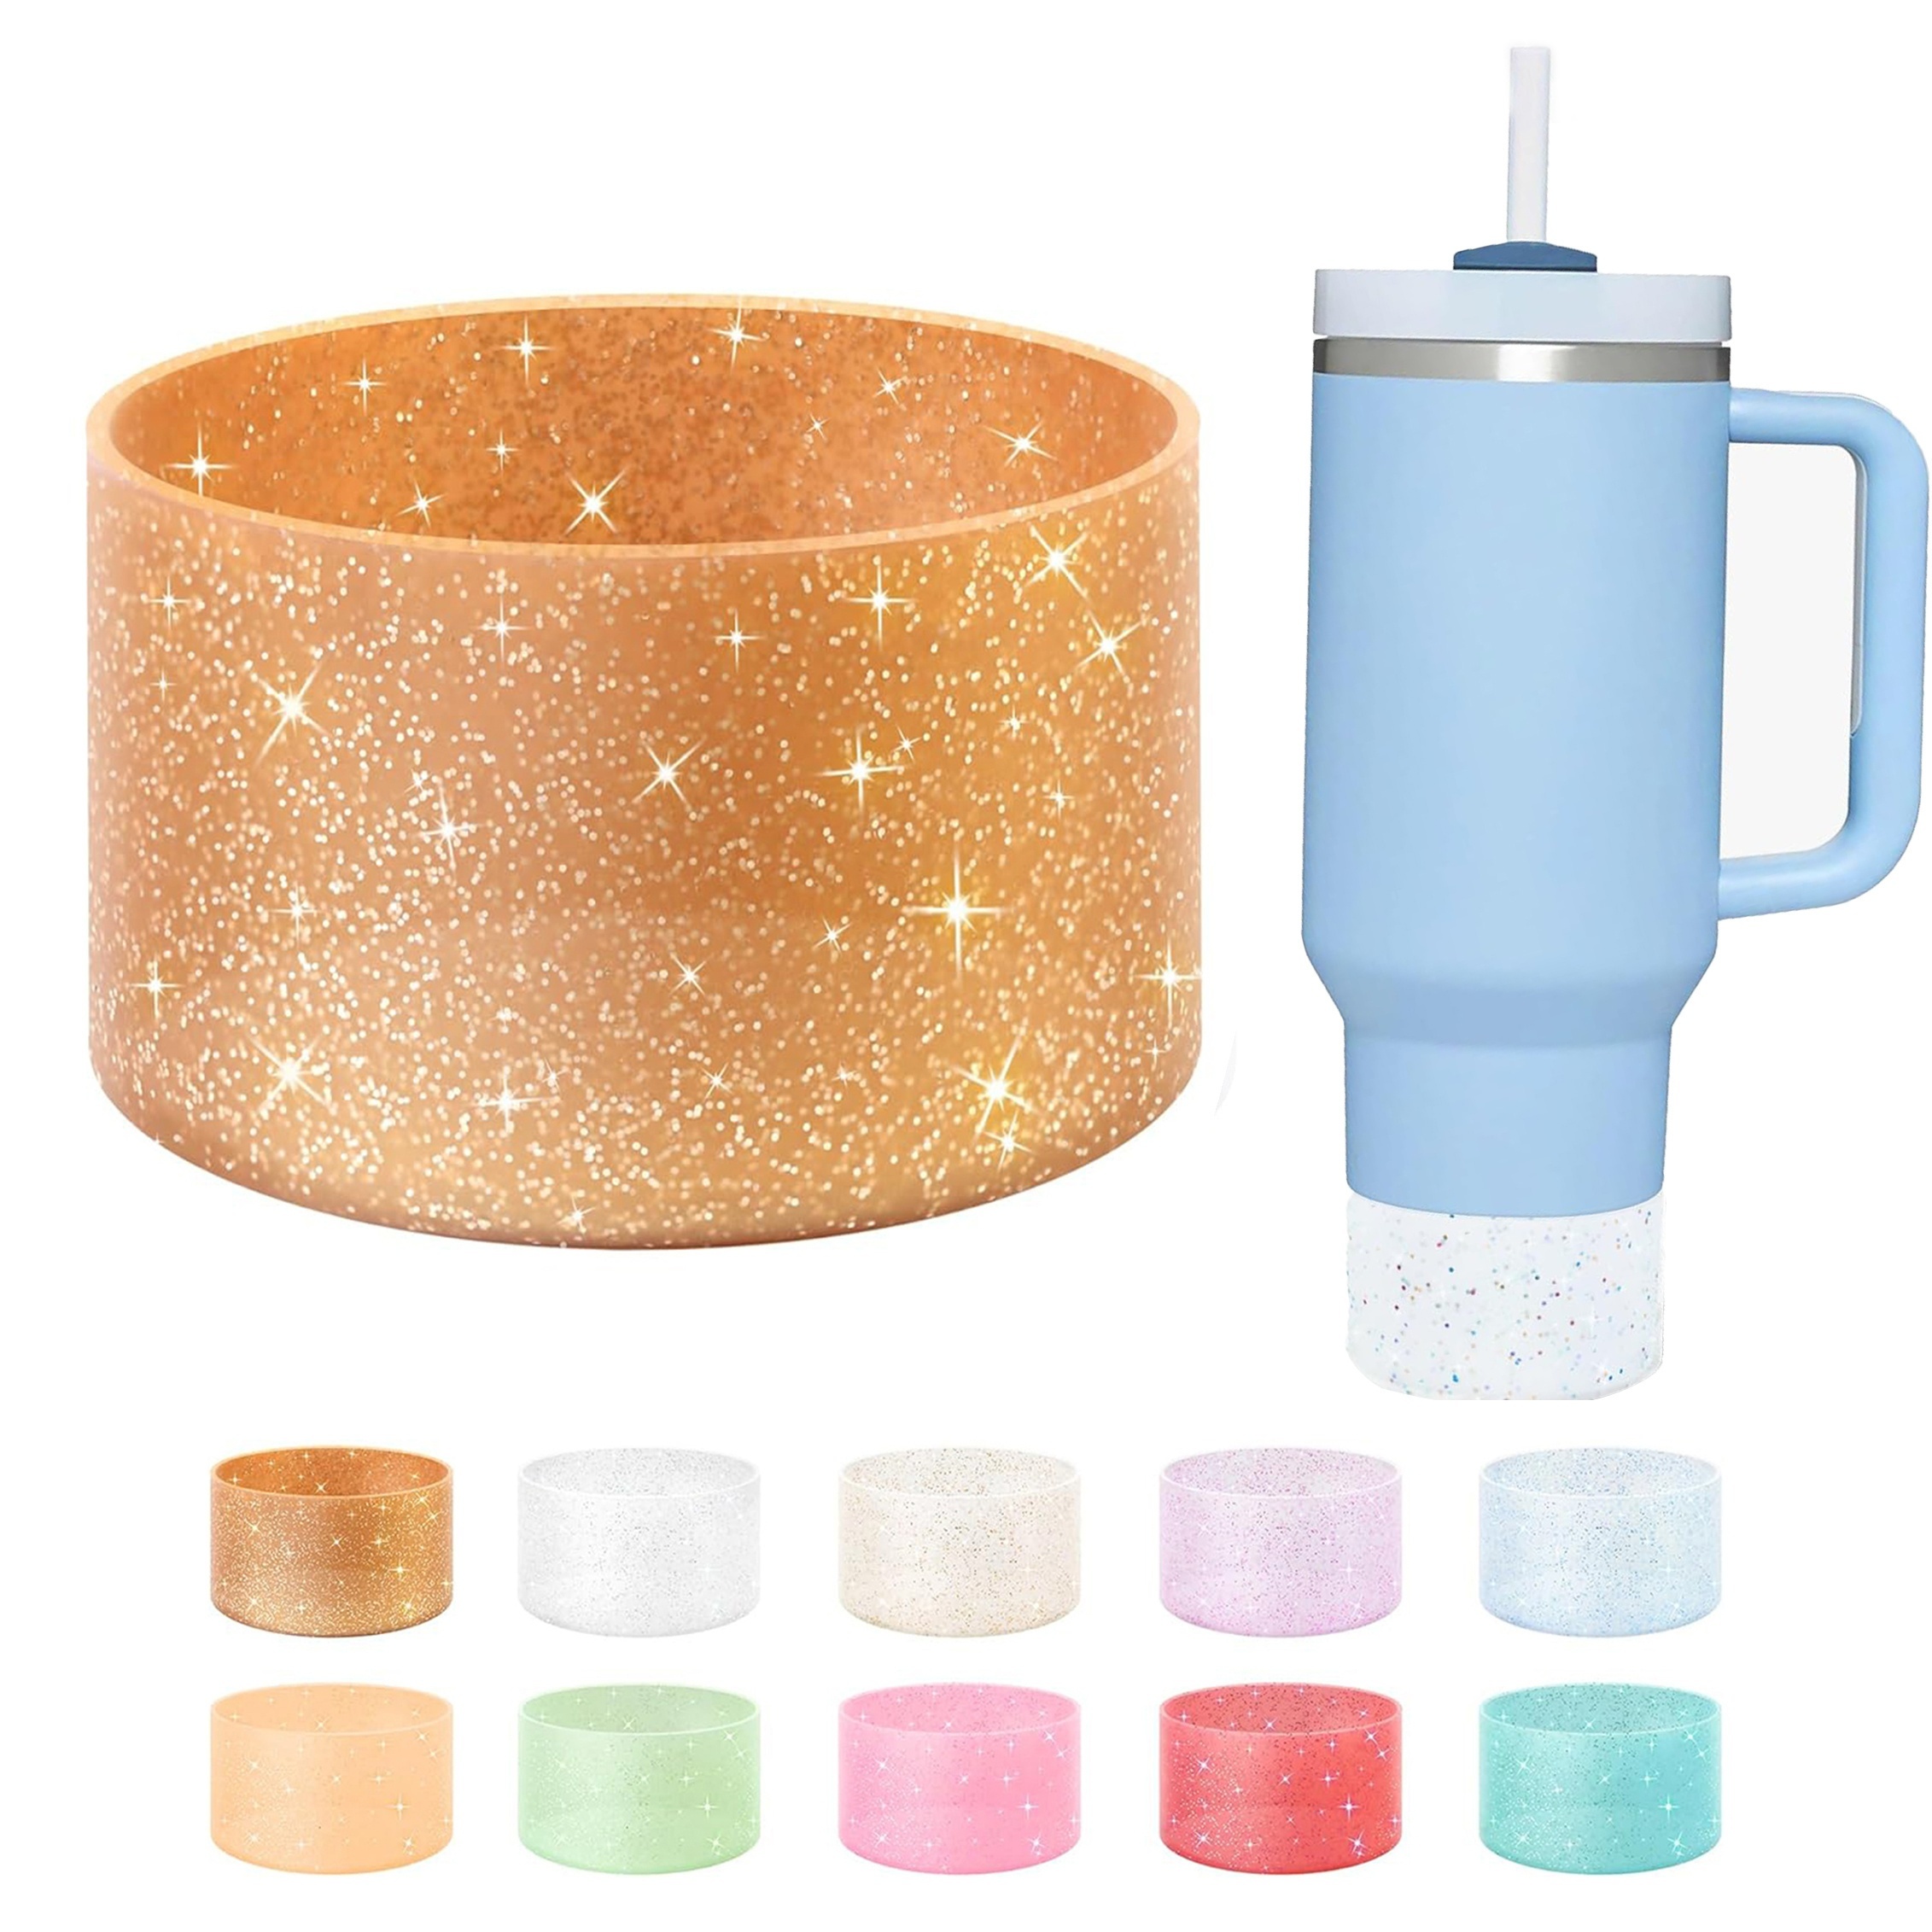 Glitter Silicone Cup Boot Sleeve, Non-slip Cup Bottom Cover, Cup